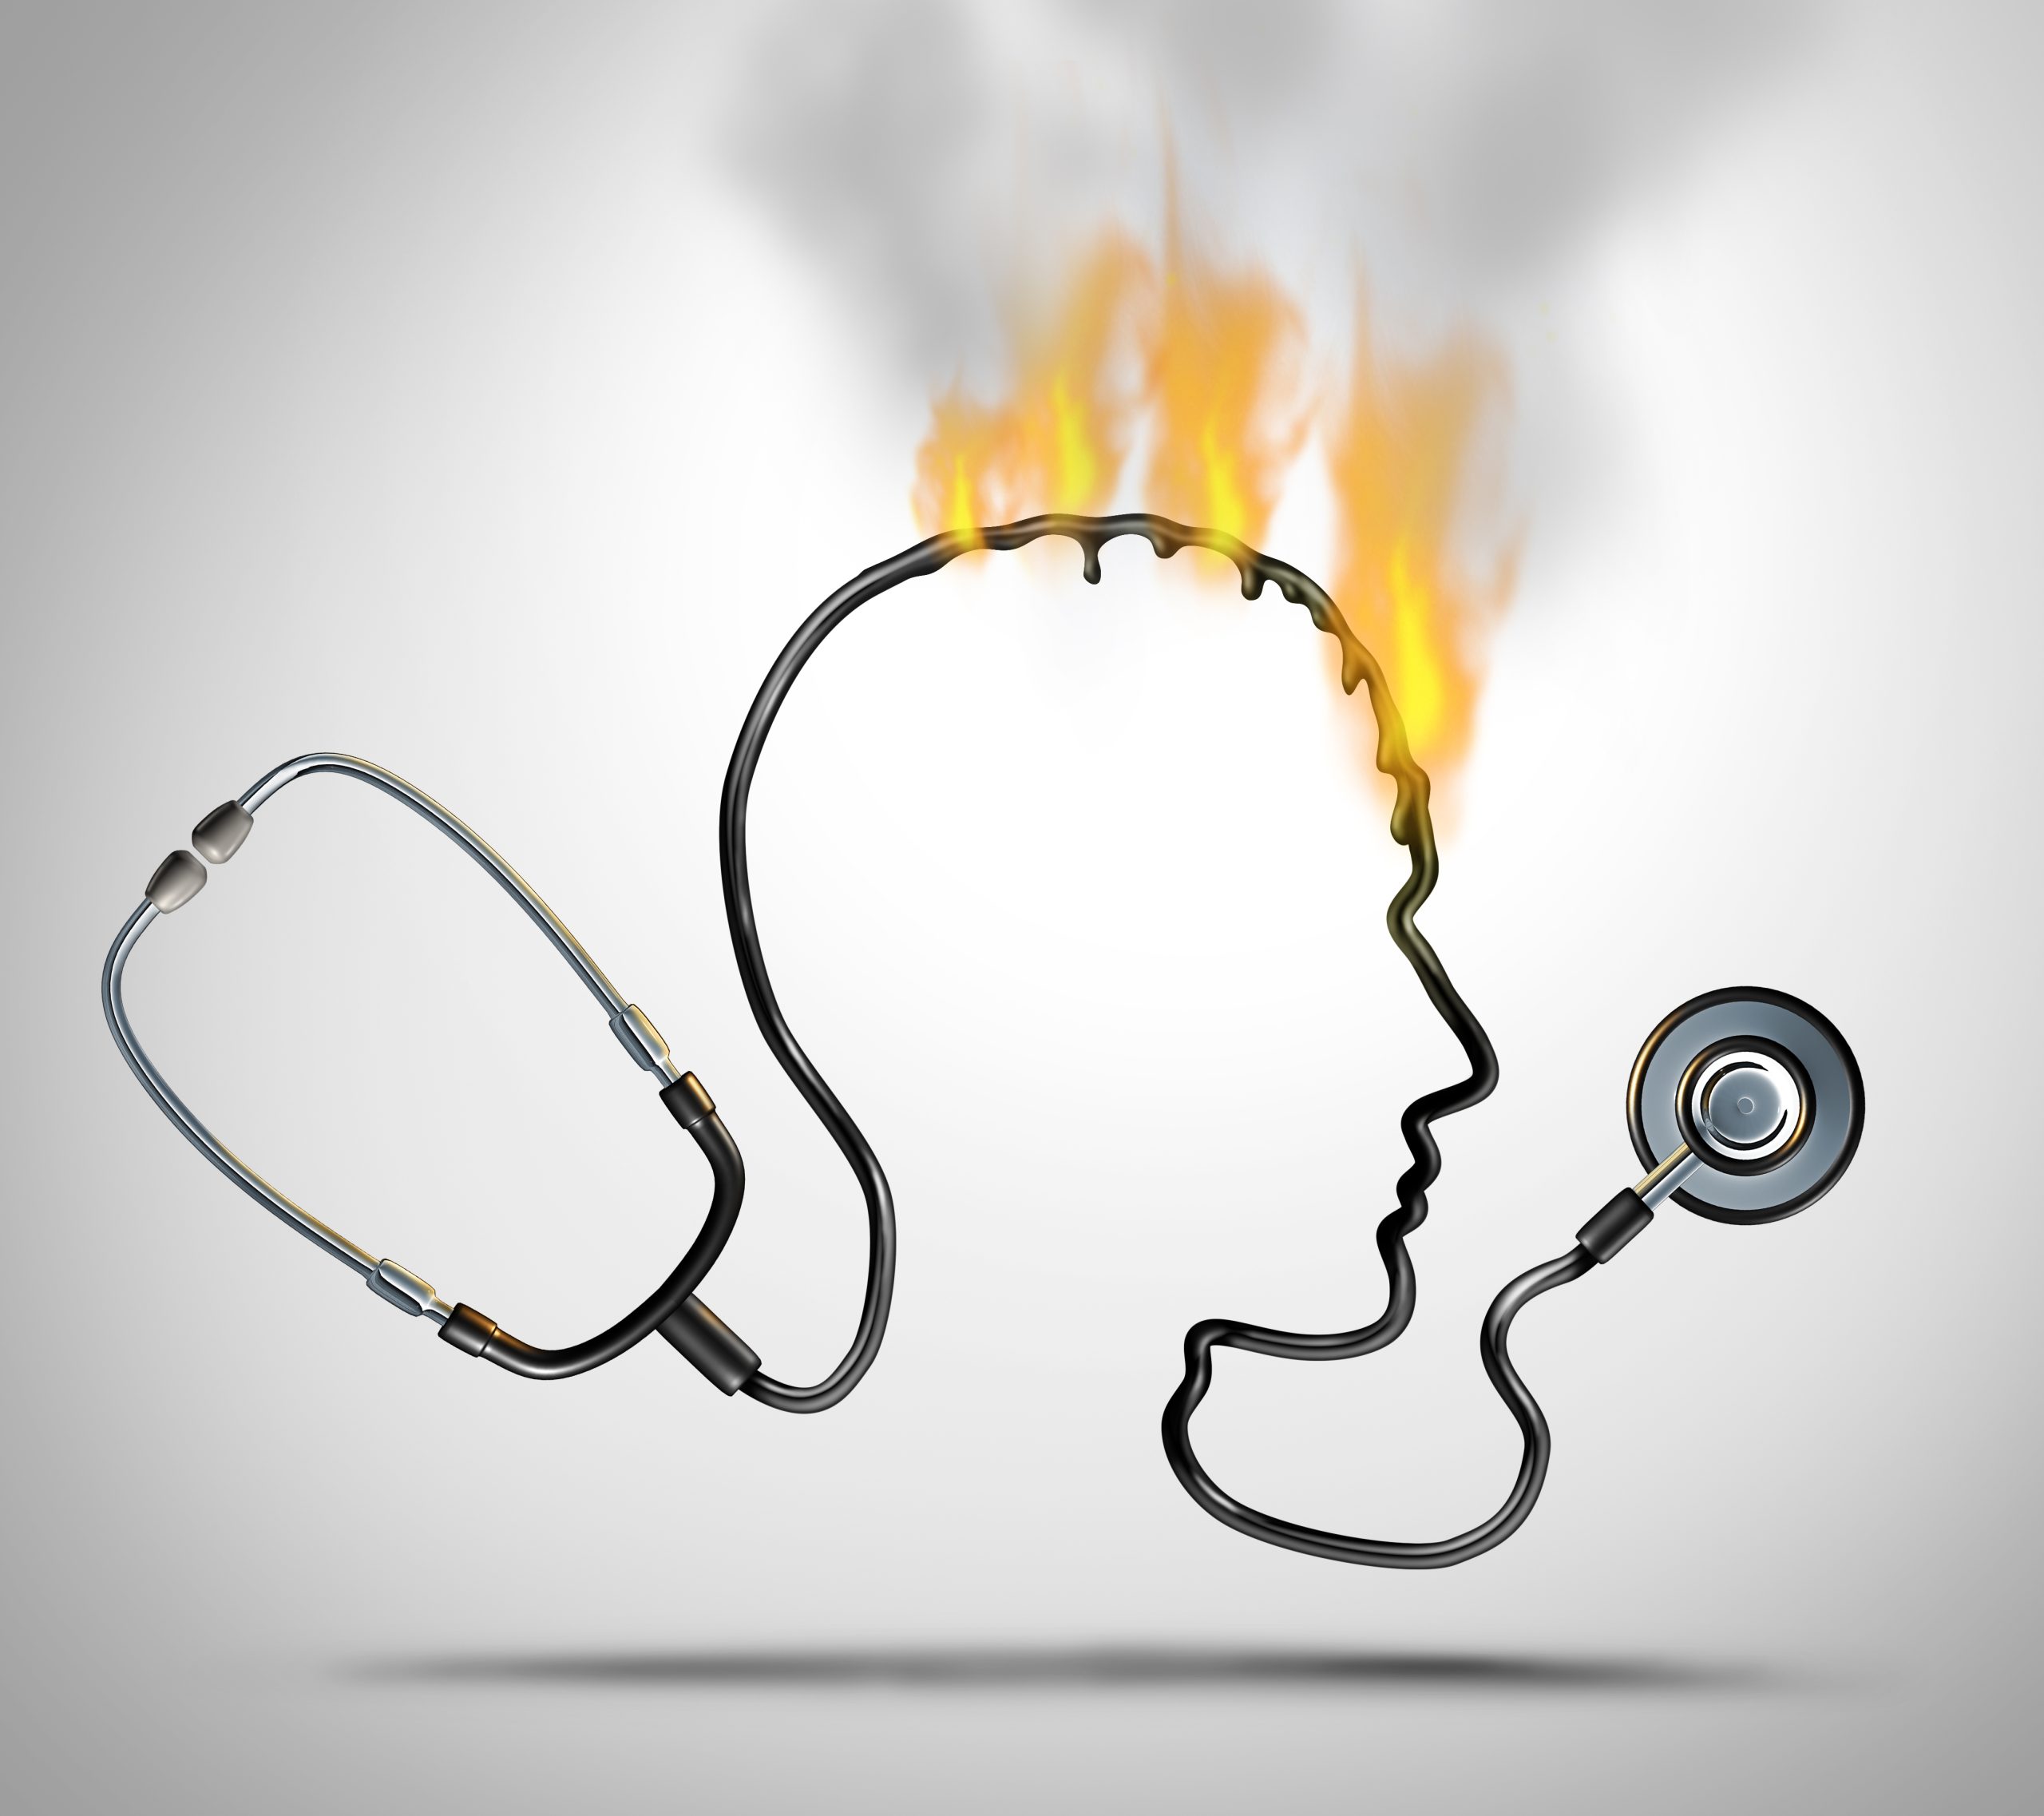 Physcian burnout the Developing Doctor Healthcare Crisis